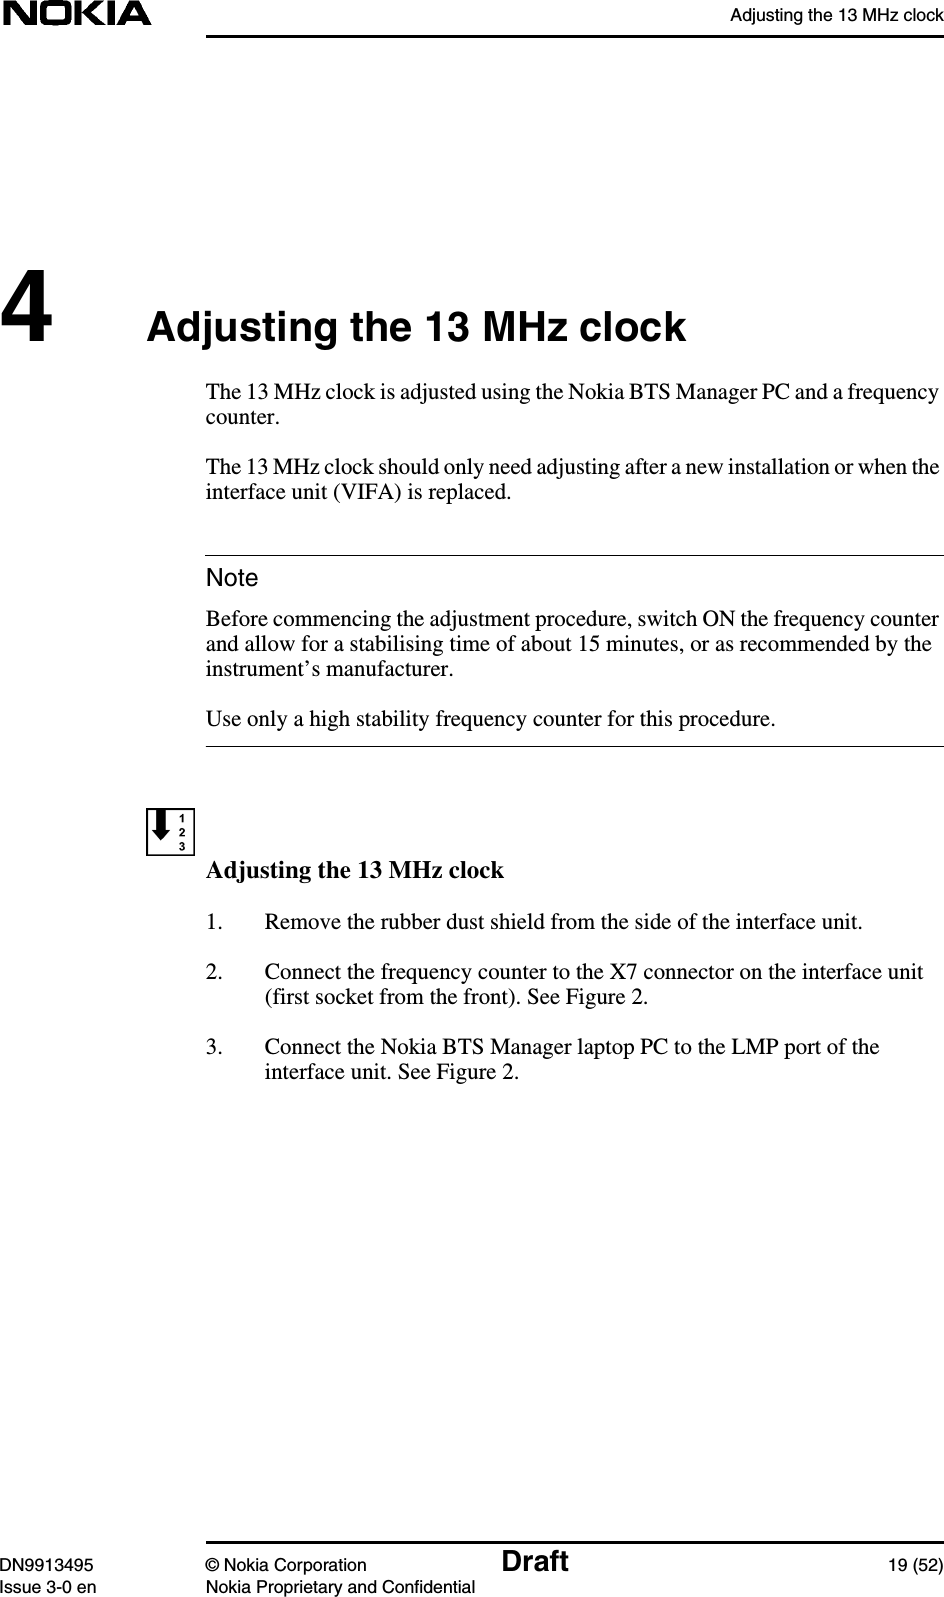 Adjusting the 13 MHz clockDN9913495 © Nokia Corporation Draft 19 (52)Issue 3-0 en Nokia Proprietary and ConfidentialNote4Adjusting the 13 MHz clockThe 13 MHz clock is adjusted using the Nokia BTS Manager PC and a frequencycounter.The 13 MHz clock should only need adjusting after a new installation or when theinterface unit (VIFA) is replaced.Before commencing the adjustment procedure, switch ON the frequency counterand allow for a stabilising time of about 15 minutes, or as recommended by theinstrument’s manufacturer.Use only a high stability frequency counter for this procedure.Adjusting the 13 MHz clock1. Remove the rubber dust shield from the side of the interface unit.2. Connect the frequency counter to the X7 connector on the interface unit(first socket from the front). See Figure 2.3. Connect the Nokia BTS Manager laptop PC to the LMP port of theinterface unit. See Figure 2.